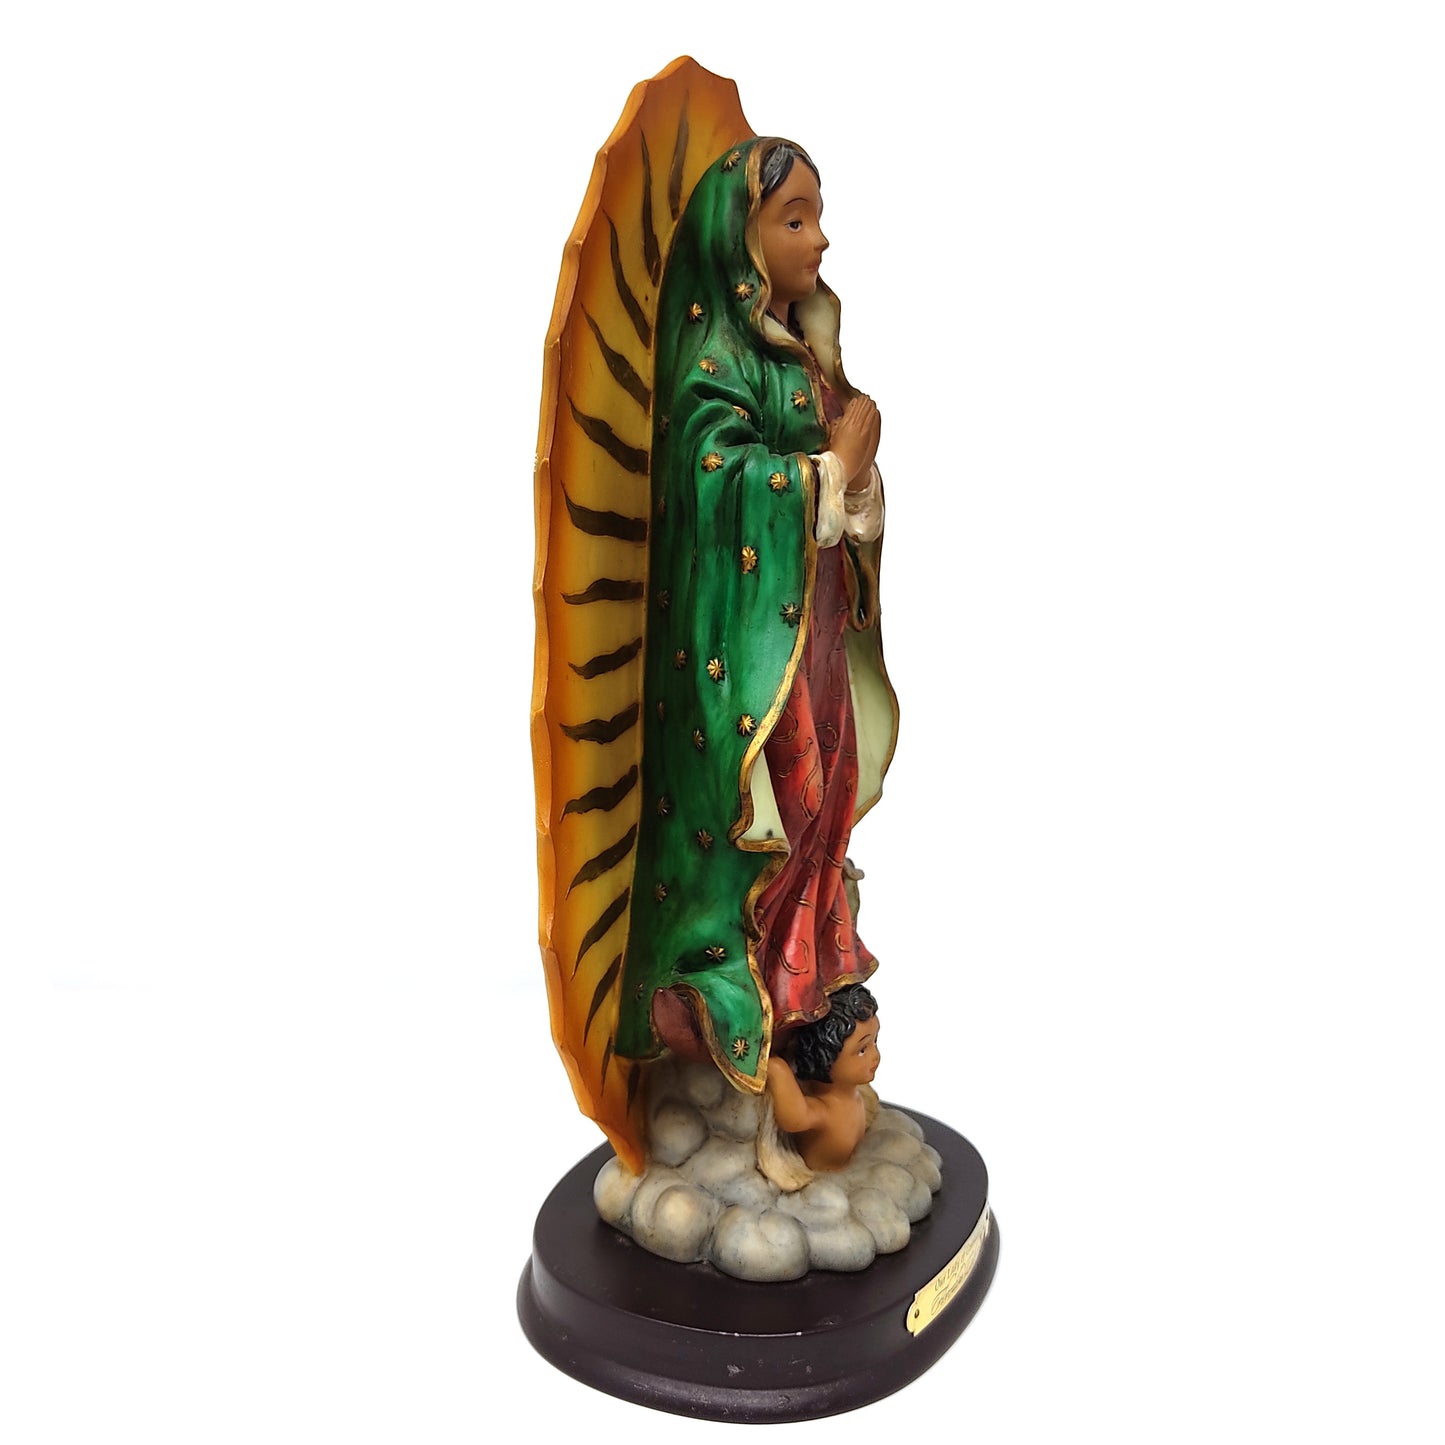 Our Lady of Guadalupe Blessed Virgin Mother Mary 11.25" Resin Statue Wood Base